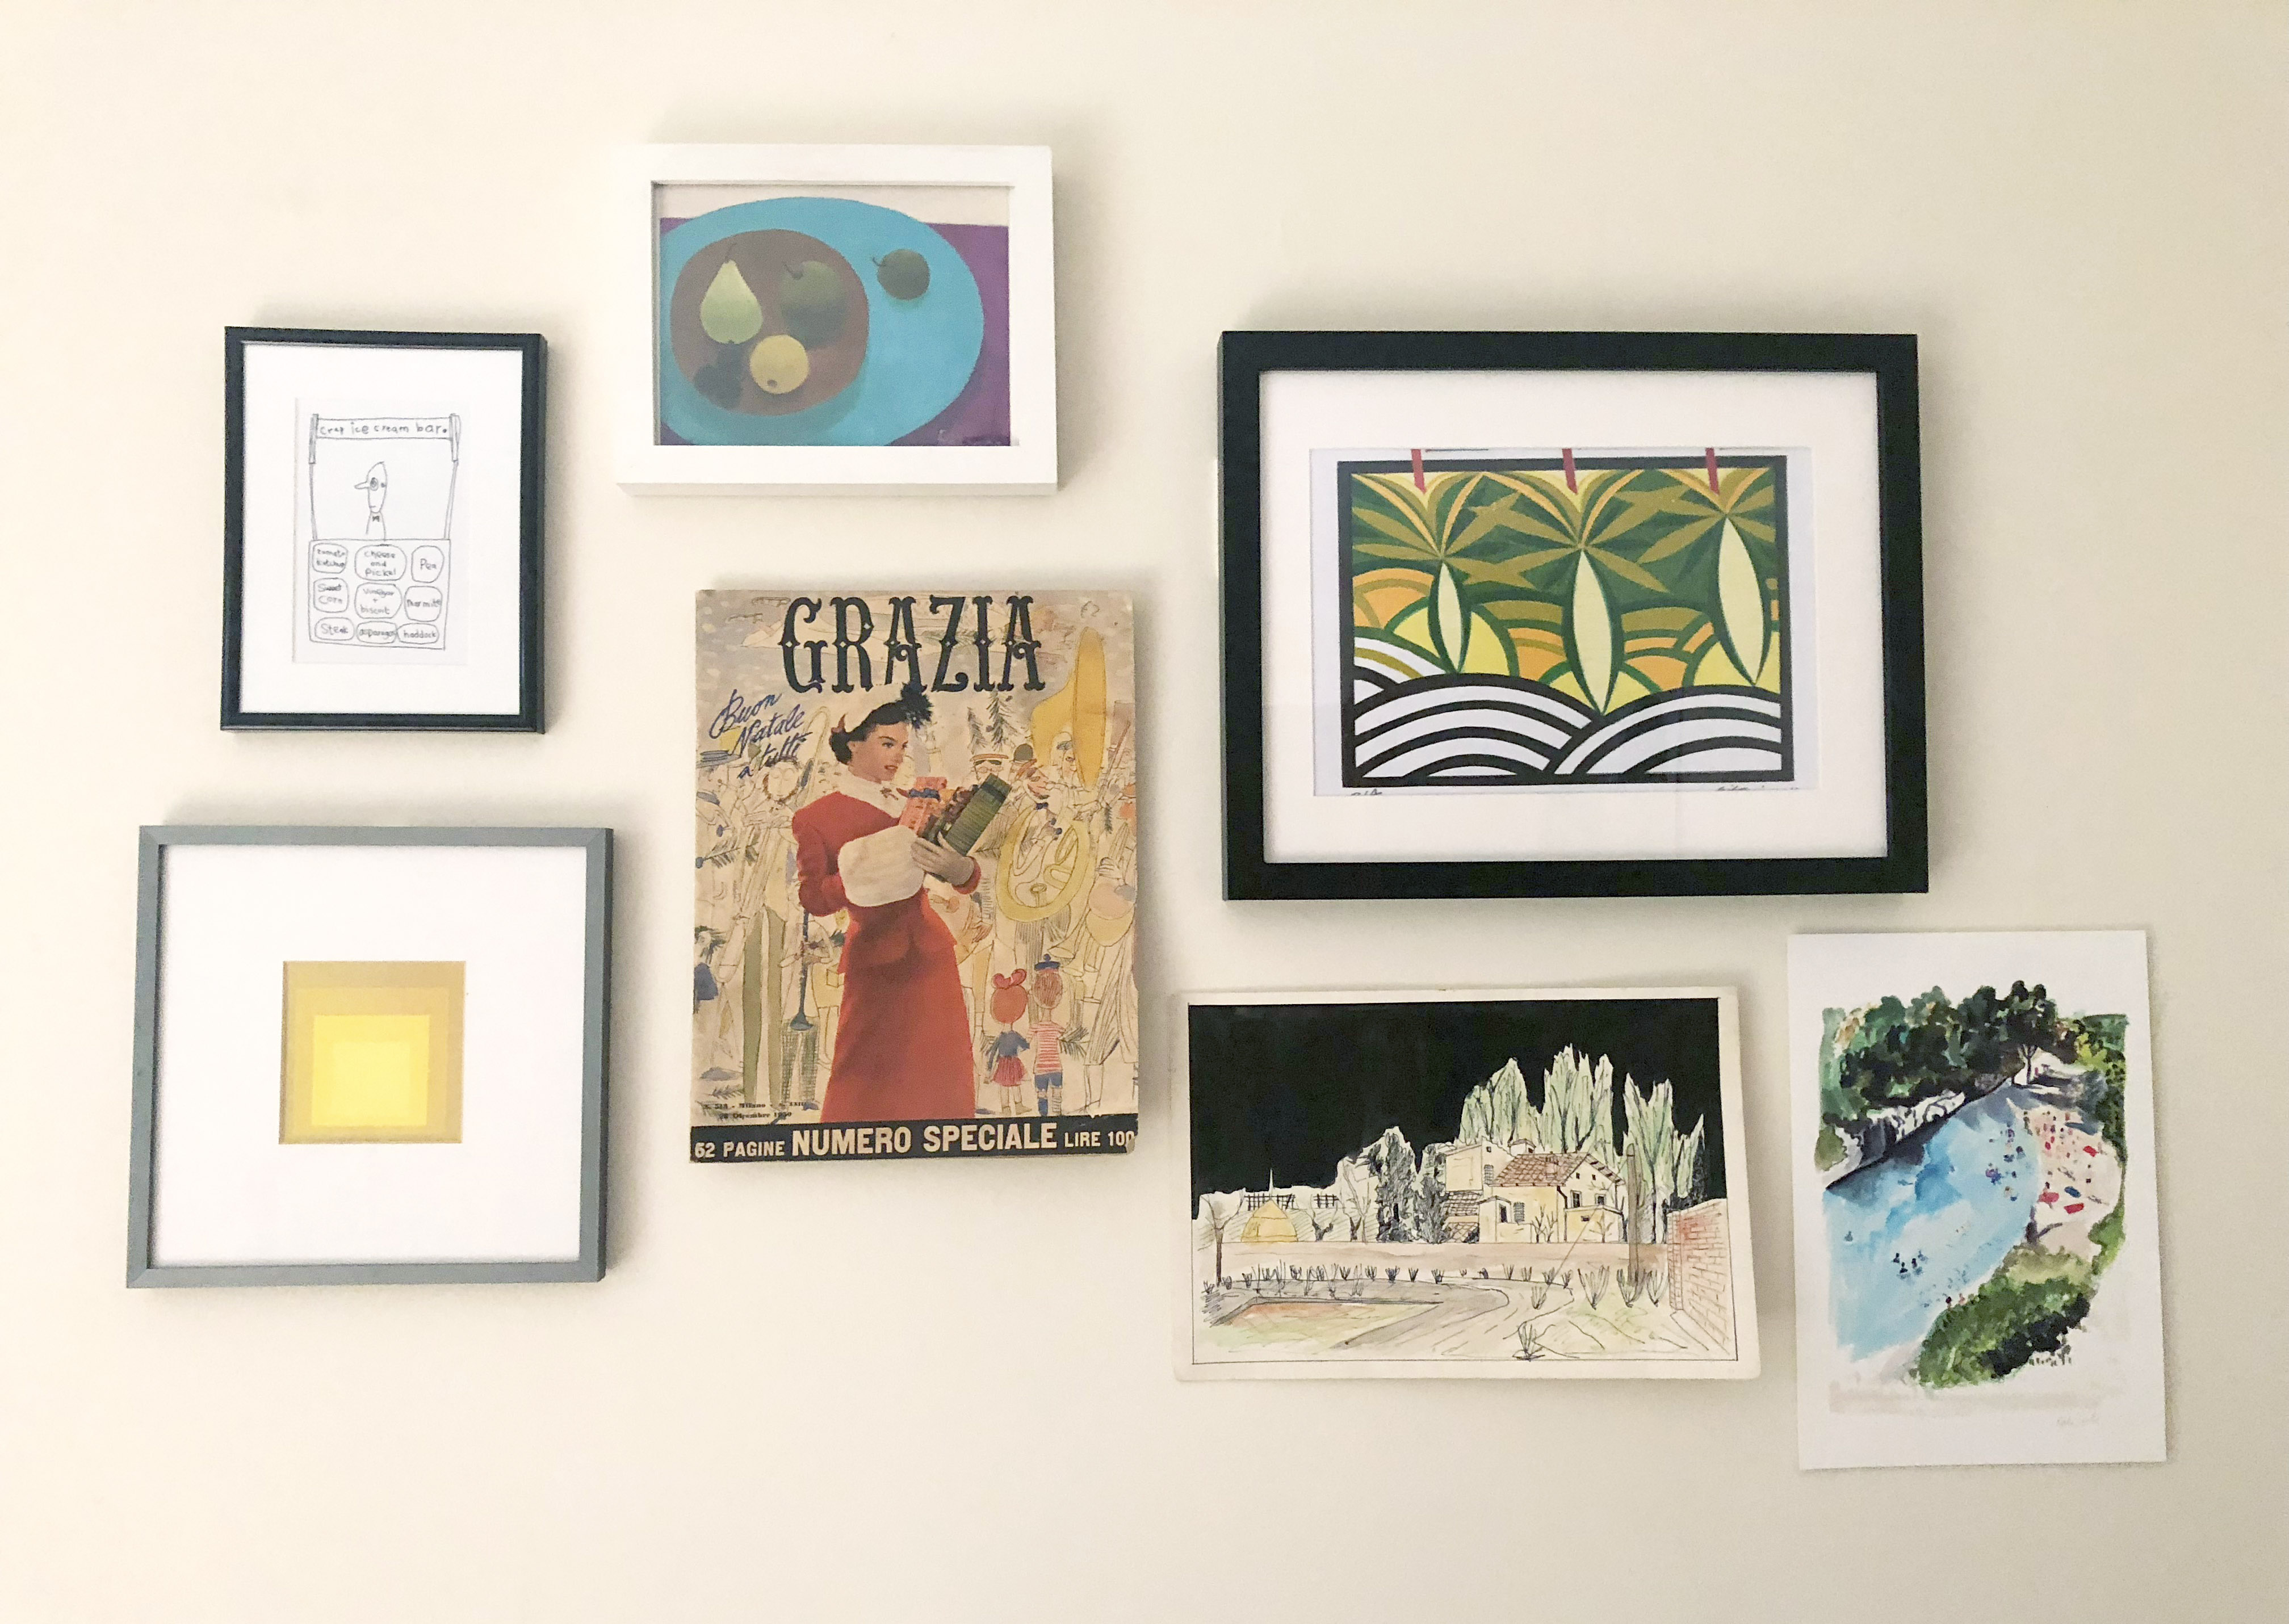 Feature wall with vintage Grazia magazine, cuban art and lithographs